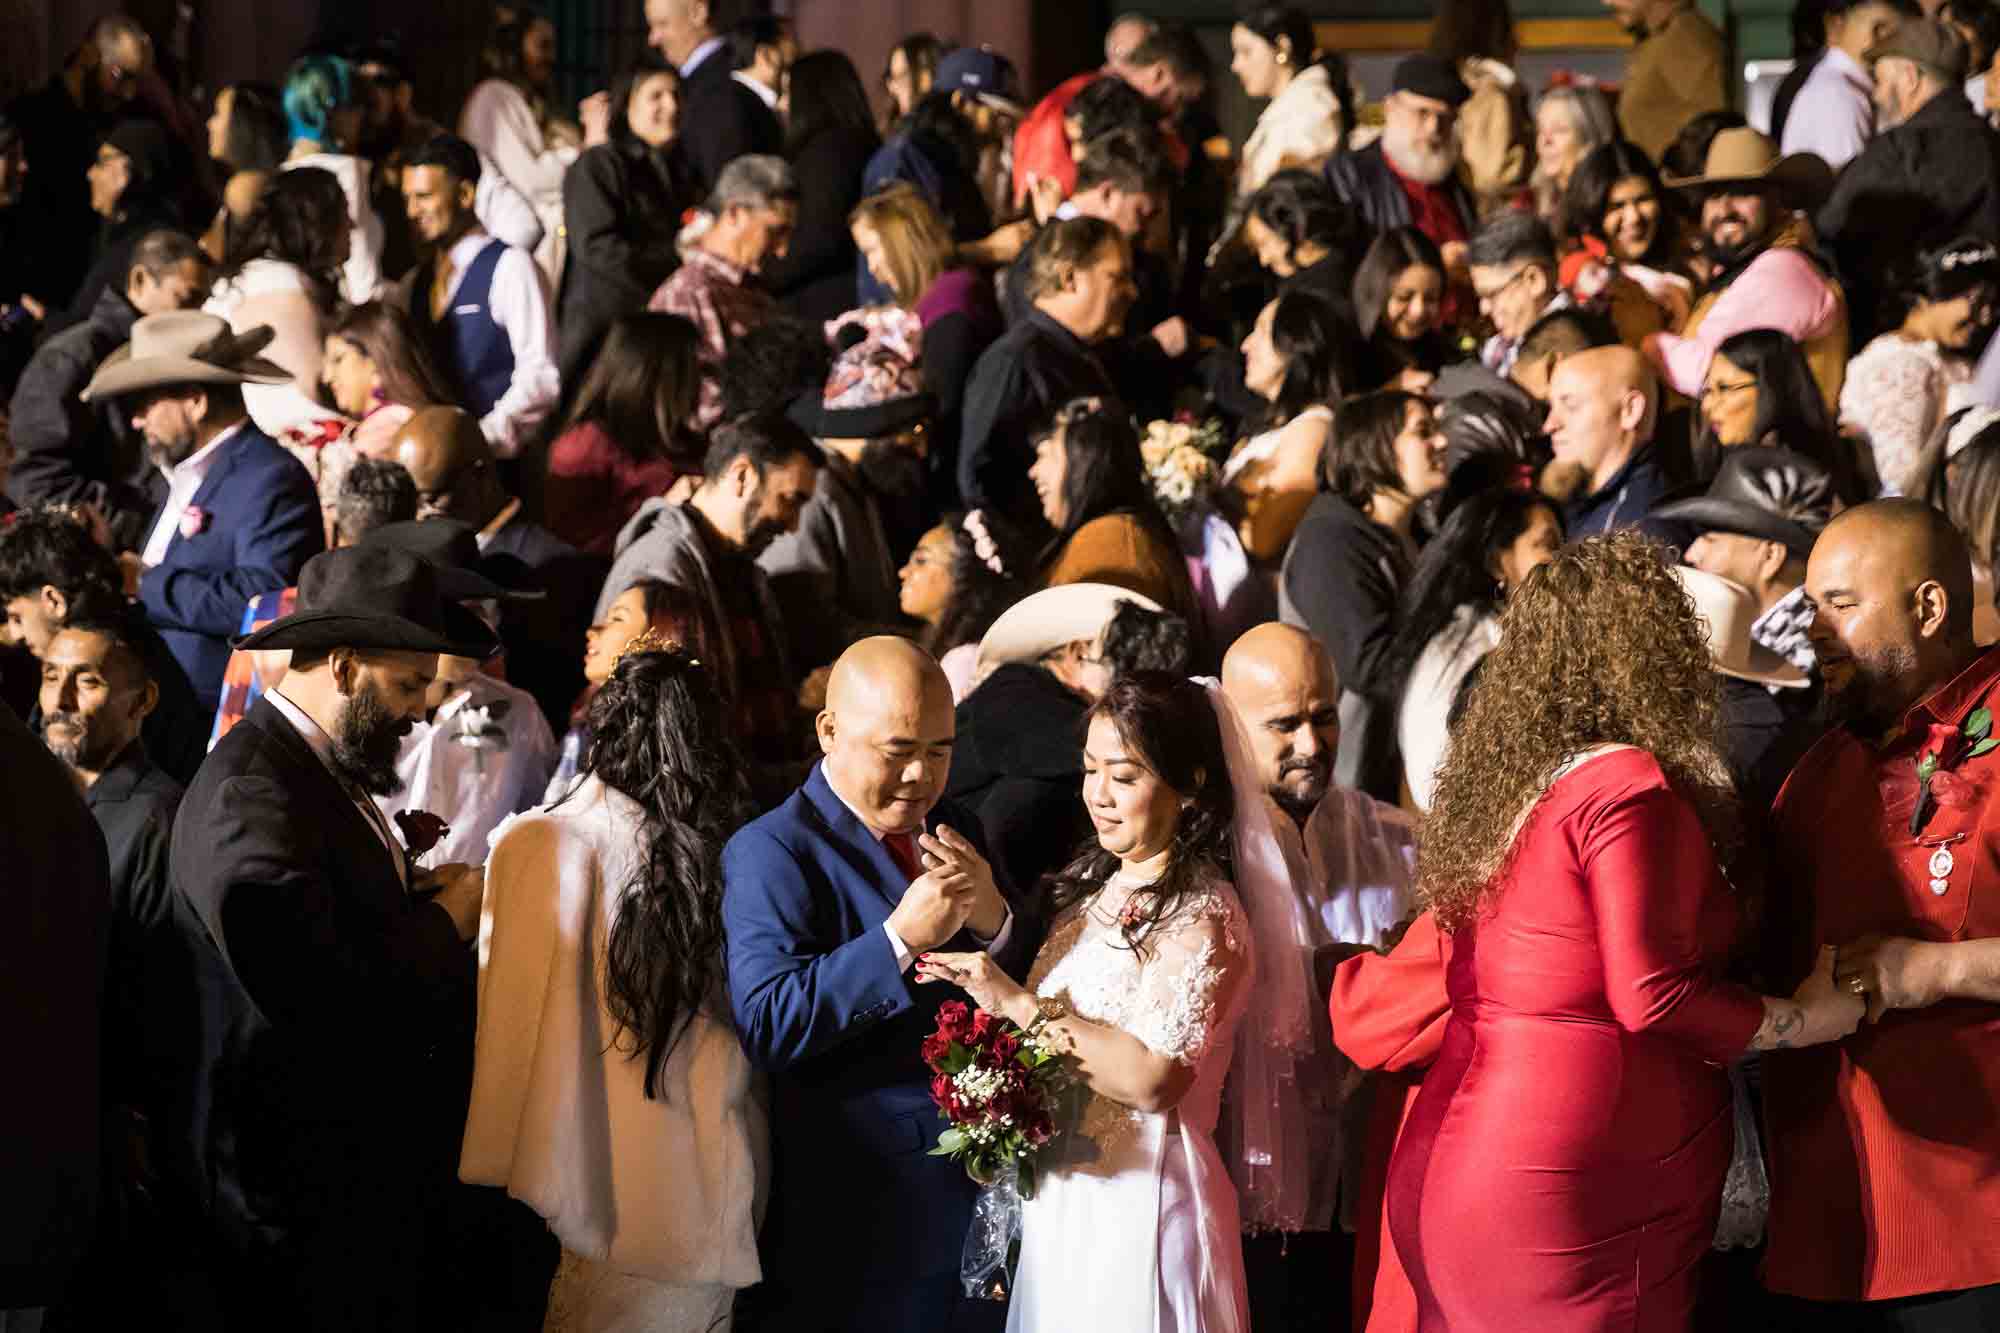 Crowd of bride and grooms putting on rings in front of courthouse steps at night for an article on the Bexar county mass wedding event